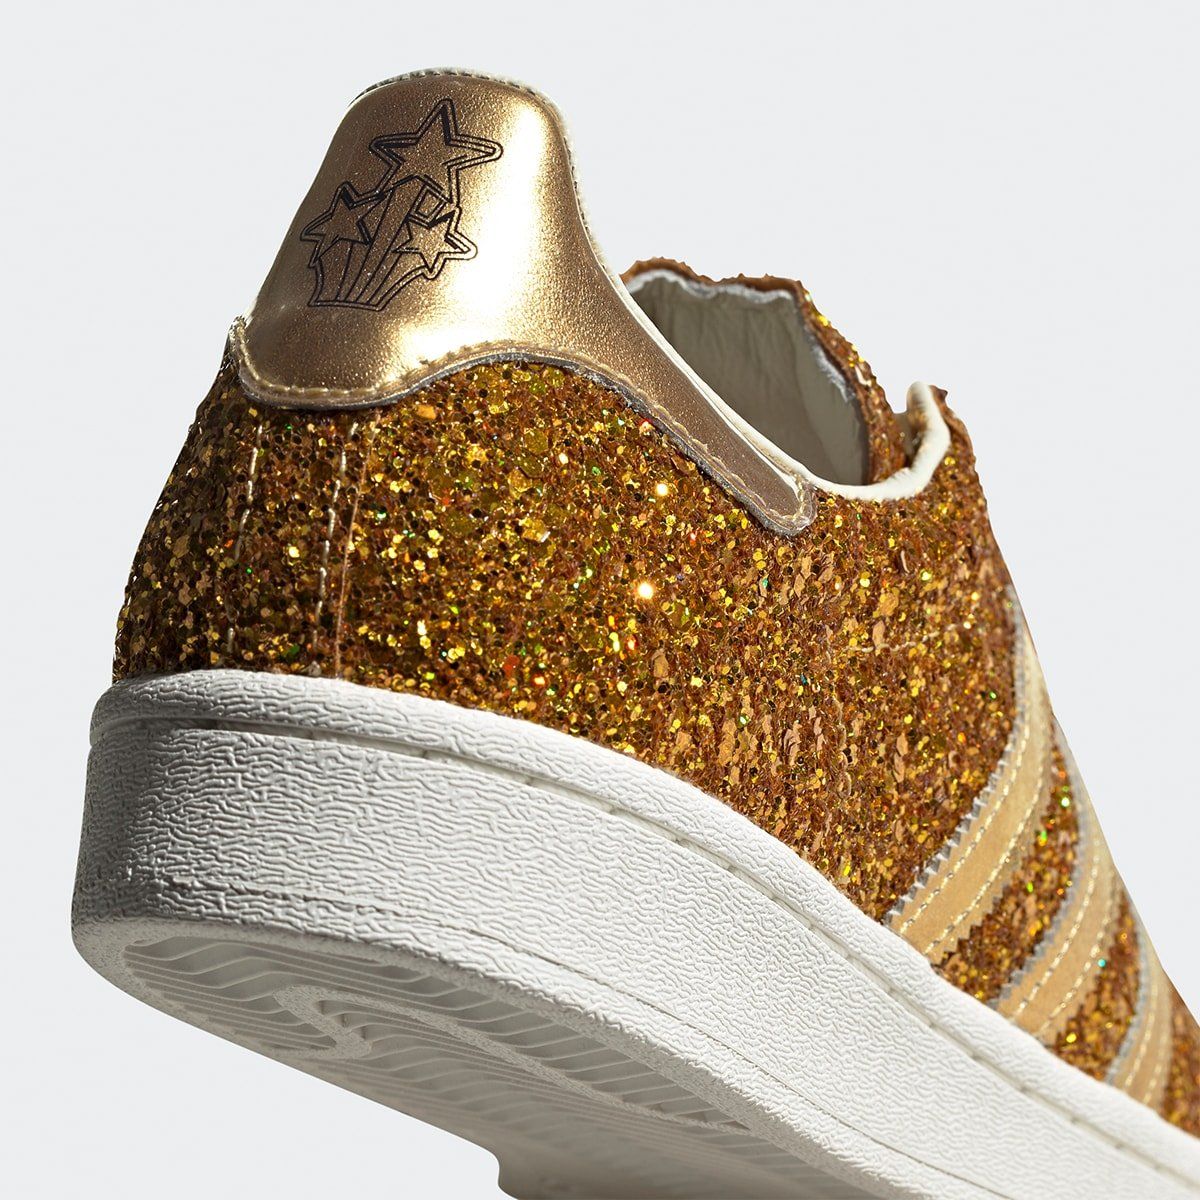 This Glittery Gold adidas Superstar Celebrates the Glitz and Glamour of Awards Season HOUSE OF HEAT